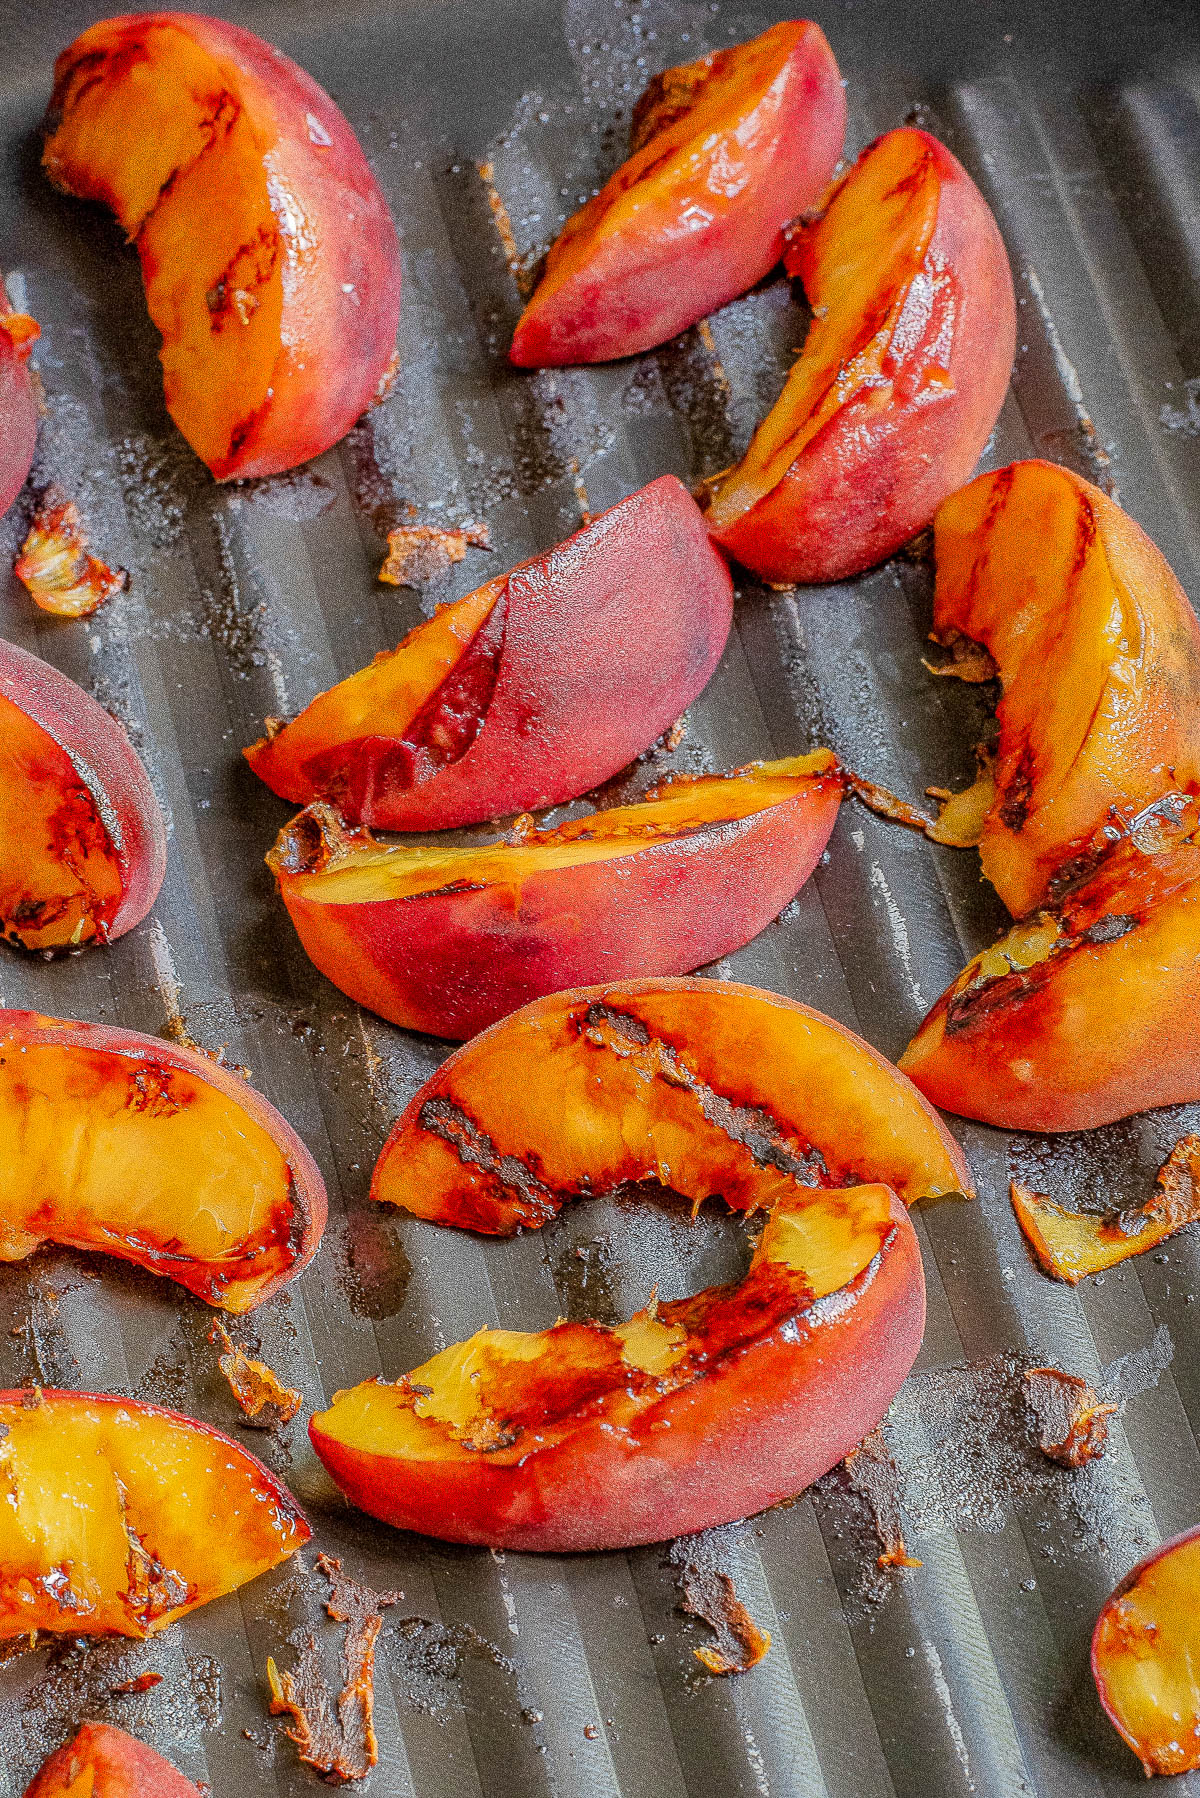 Close-up of grilled peach slices on a grill pan, with caramelized edges and grill marks visible on the fruit's surface.